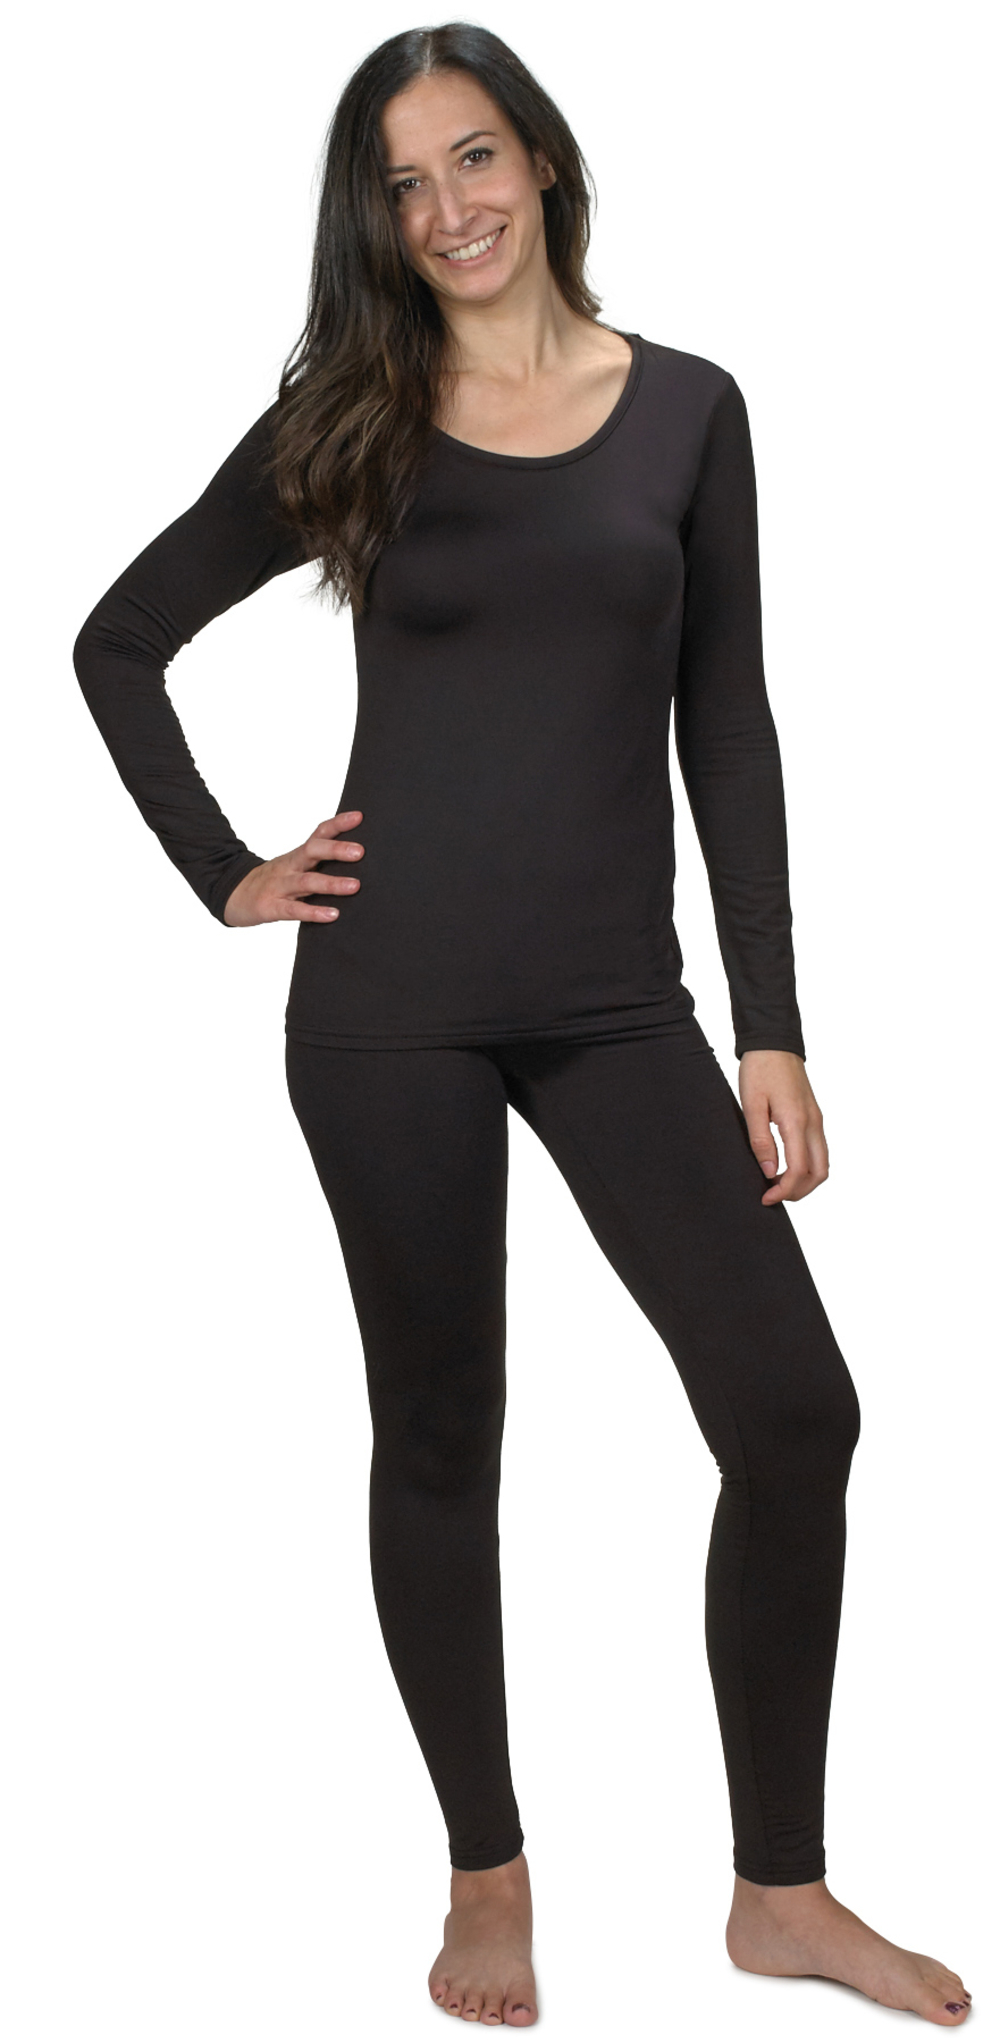 Women's Ultra Soft Thermal Underwear Long Johns Set with Fleece Lined (Black, XX-Large)… - image 1 of 4